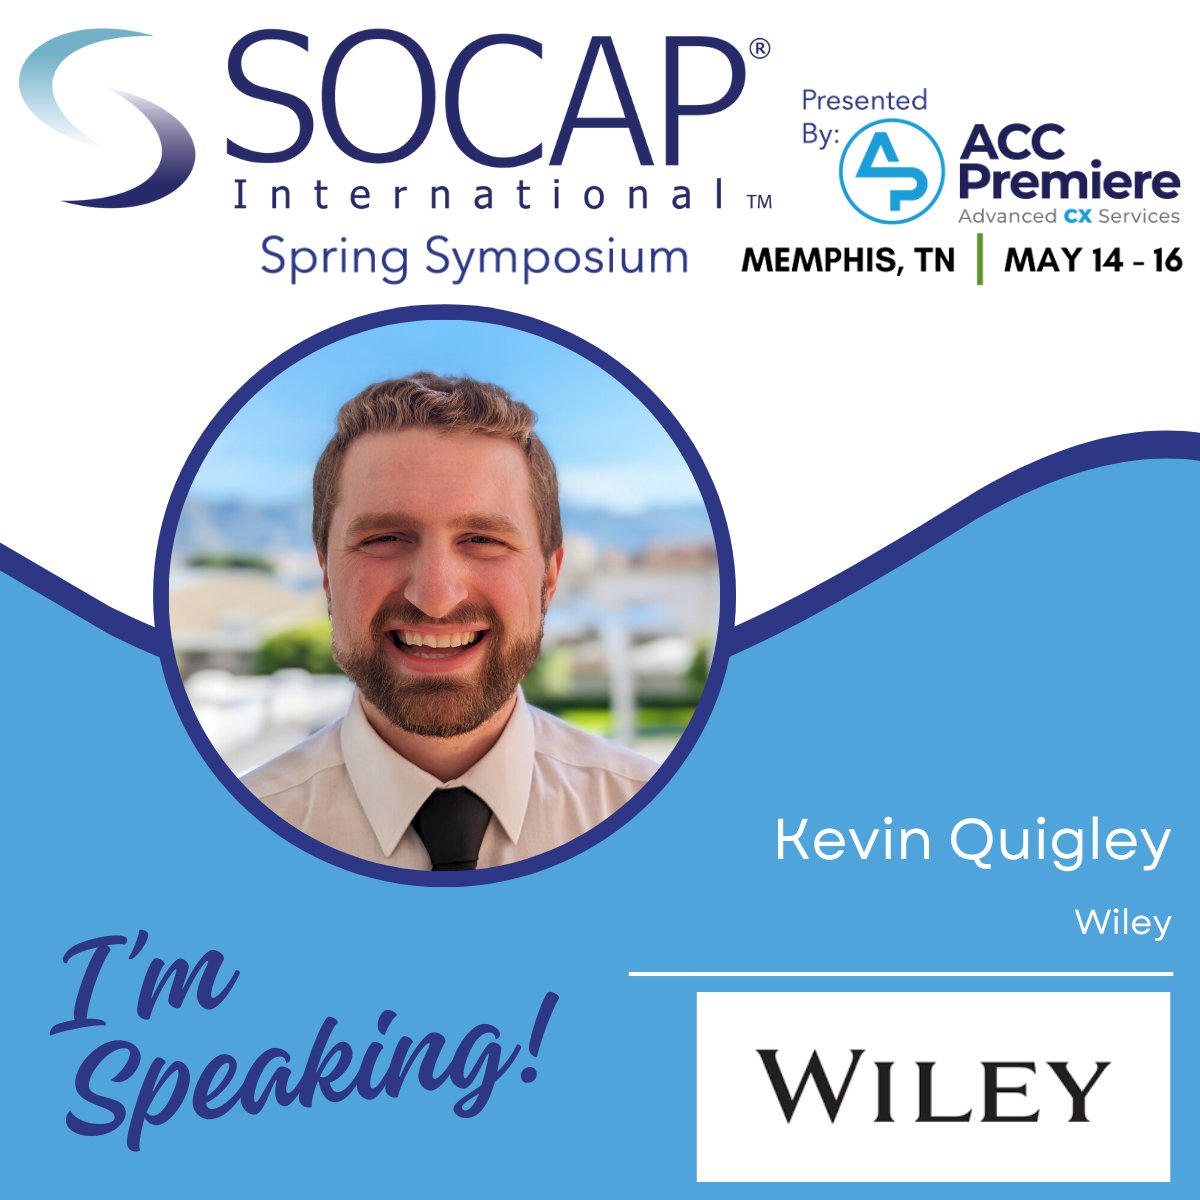 For those attending SOCAP Spring Symposium, check out my session: 'AI in Customer Service.' I will cover 1) how new tech is transforming the industry and 2) proven best practices. Naturally, the session will include a special focus on Generative AI. I hope to see you there!